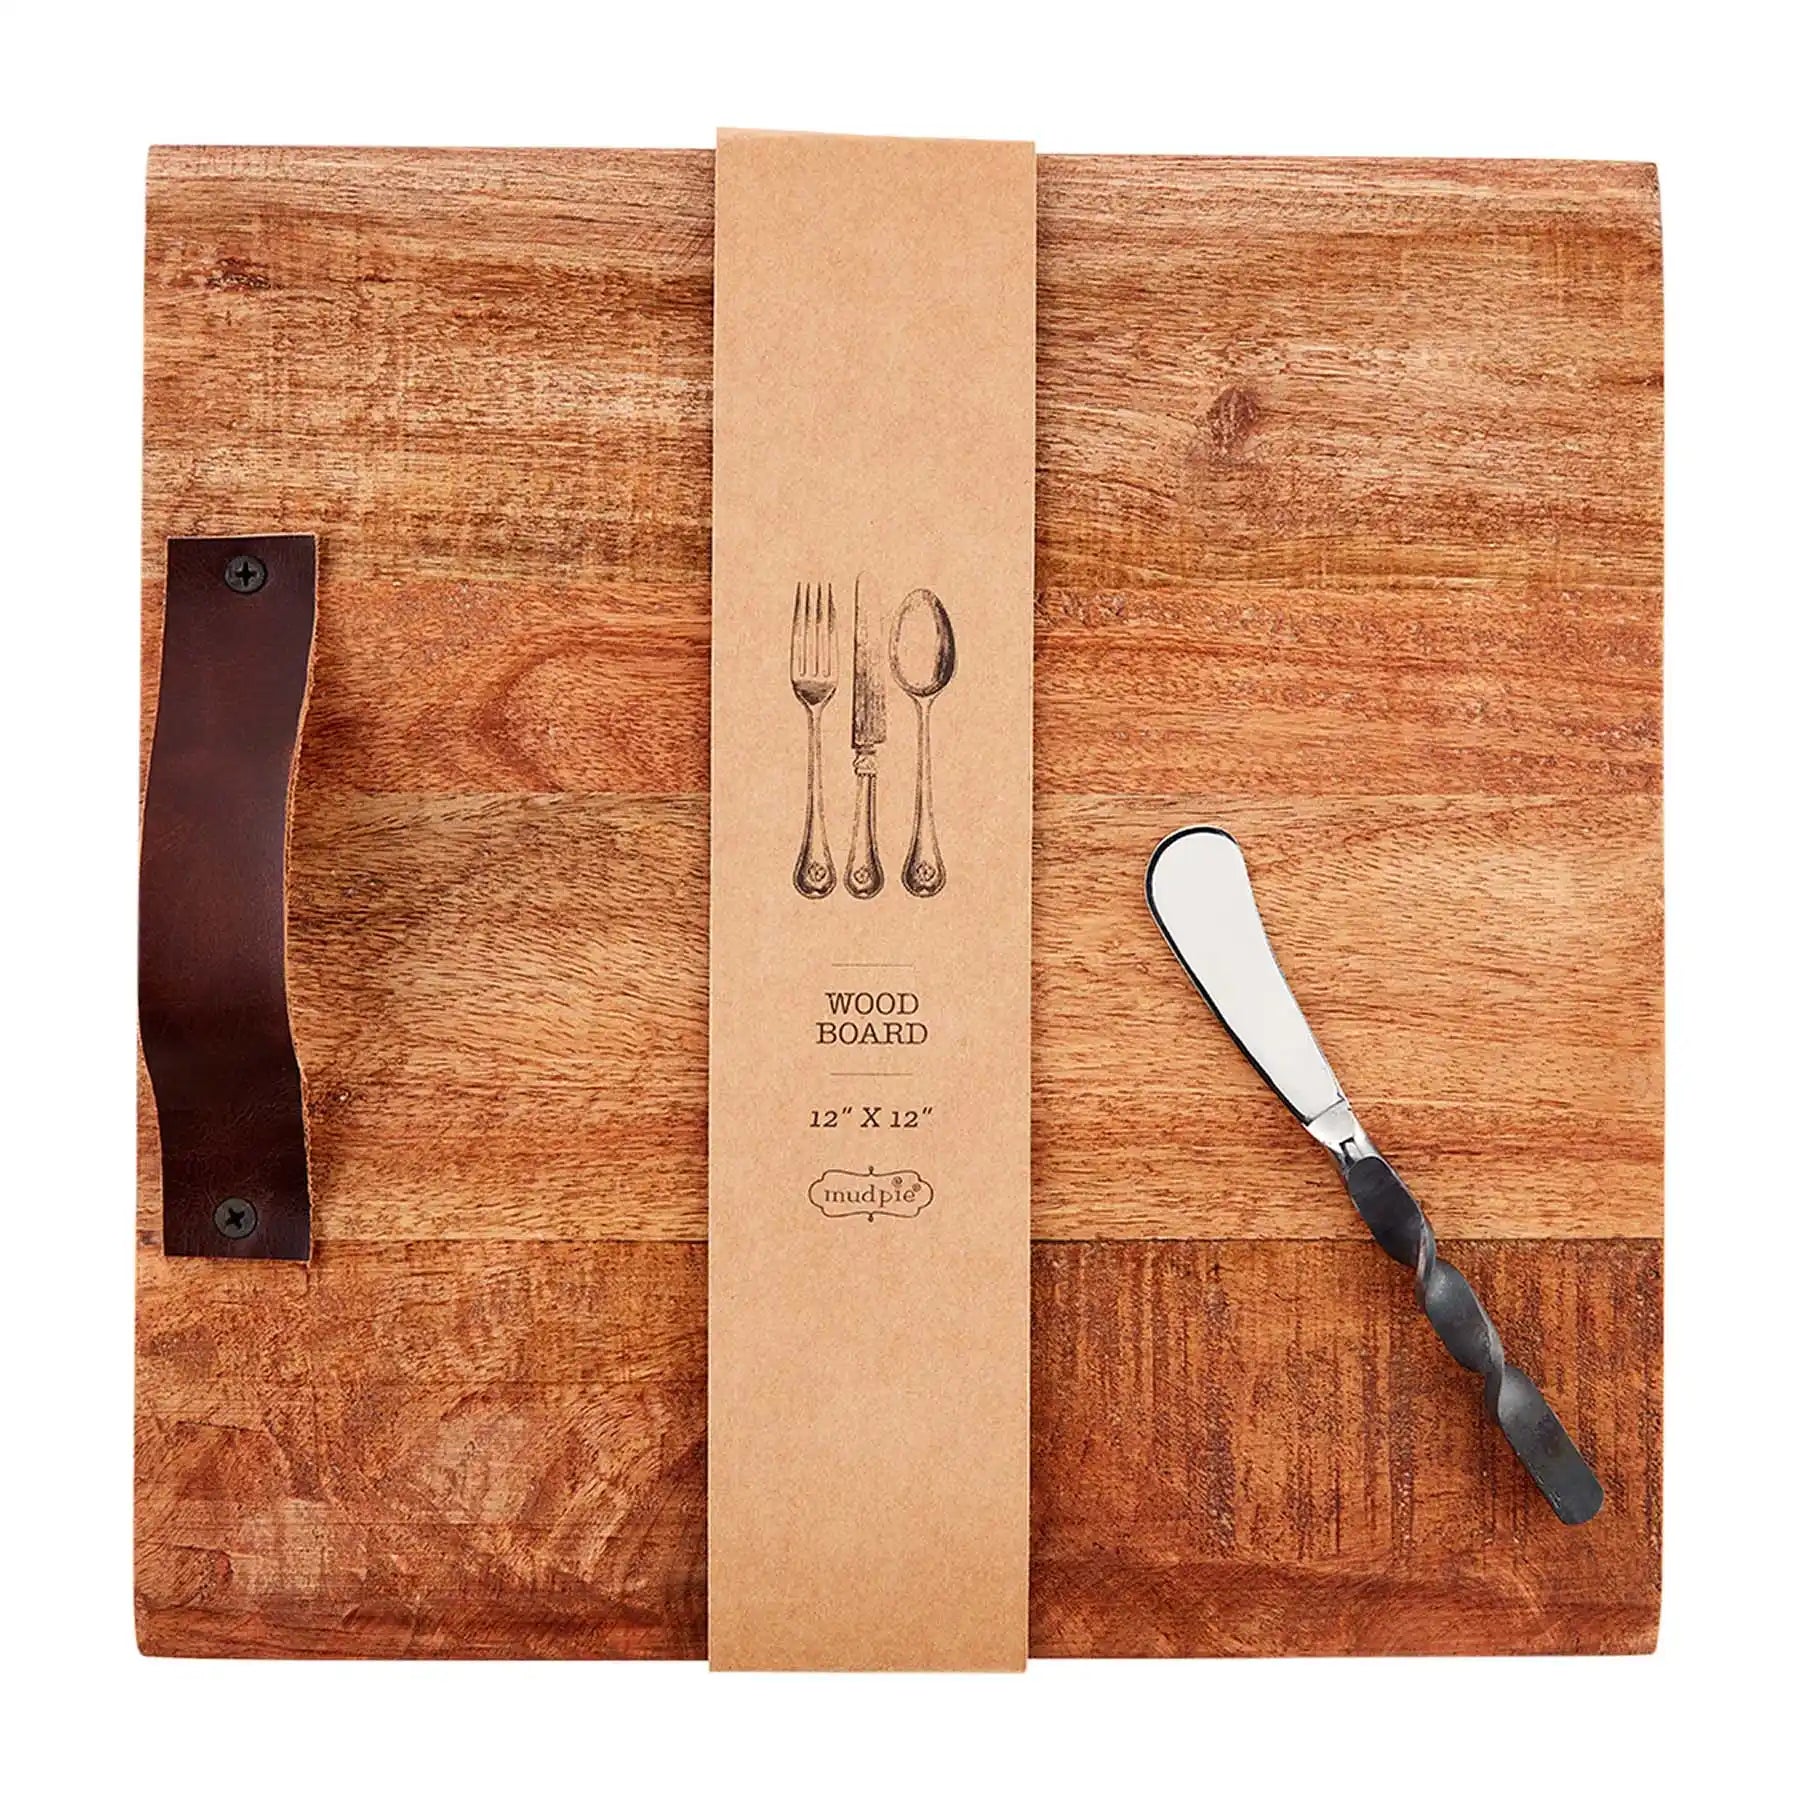 Mudpie Square Leather Handle Serving Board Set